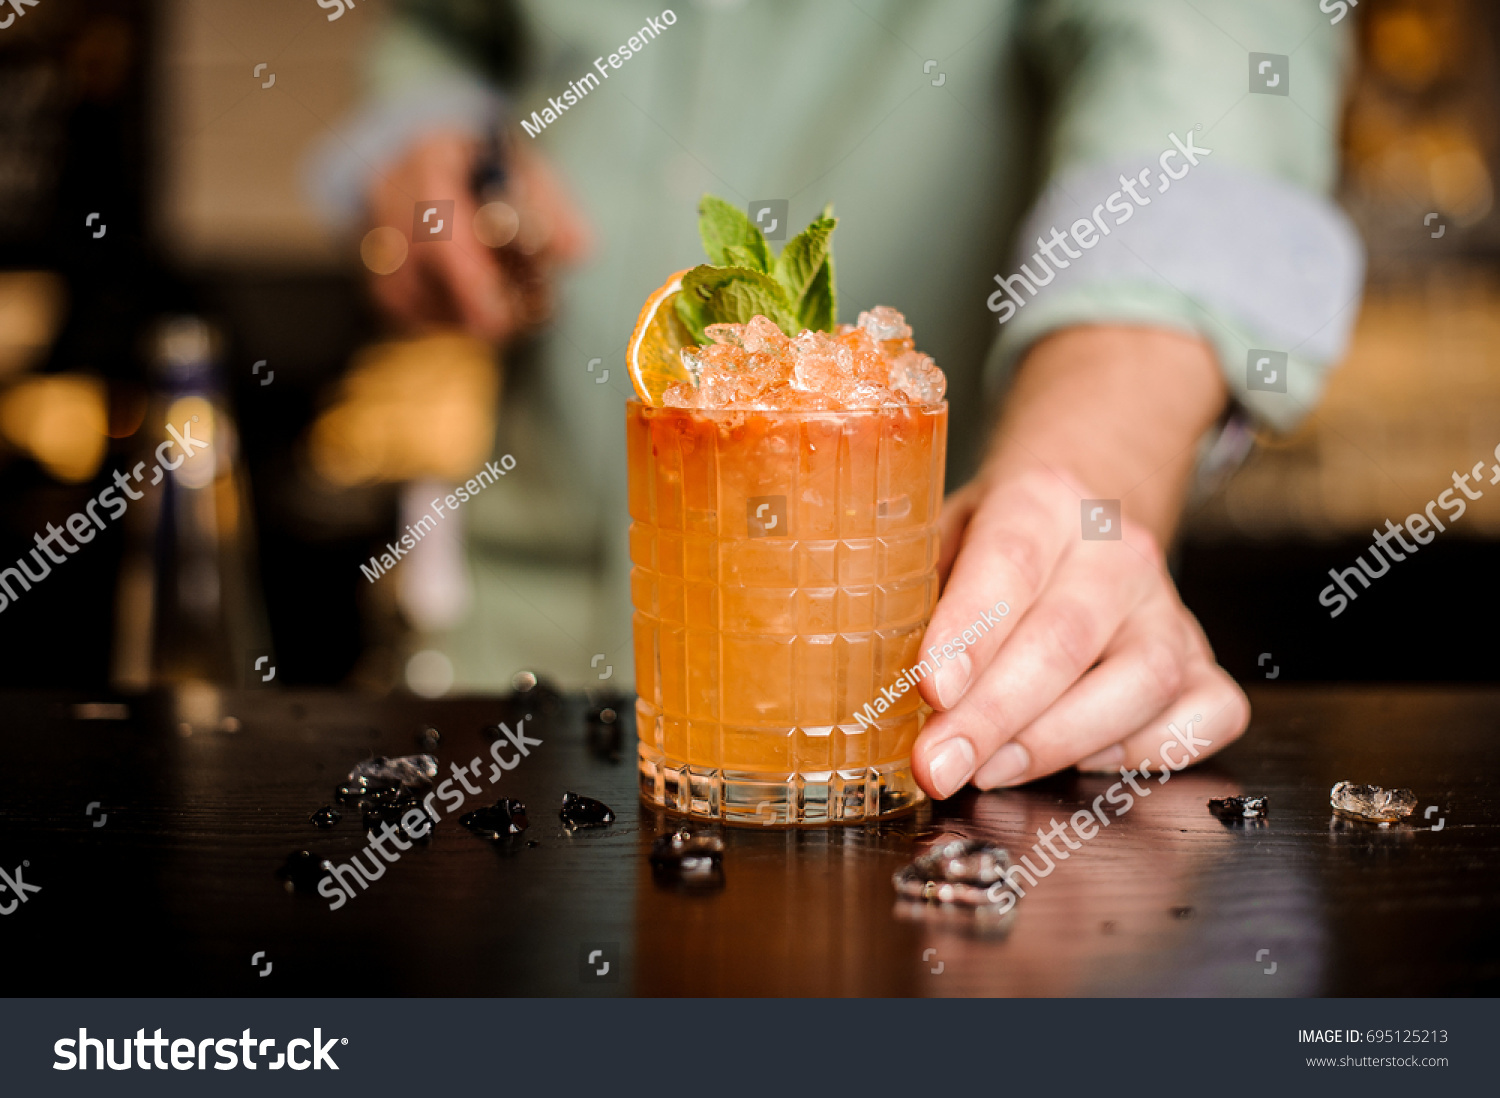 Bartender finished decorating his cocktail with mint and orange slice #695125213